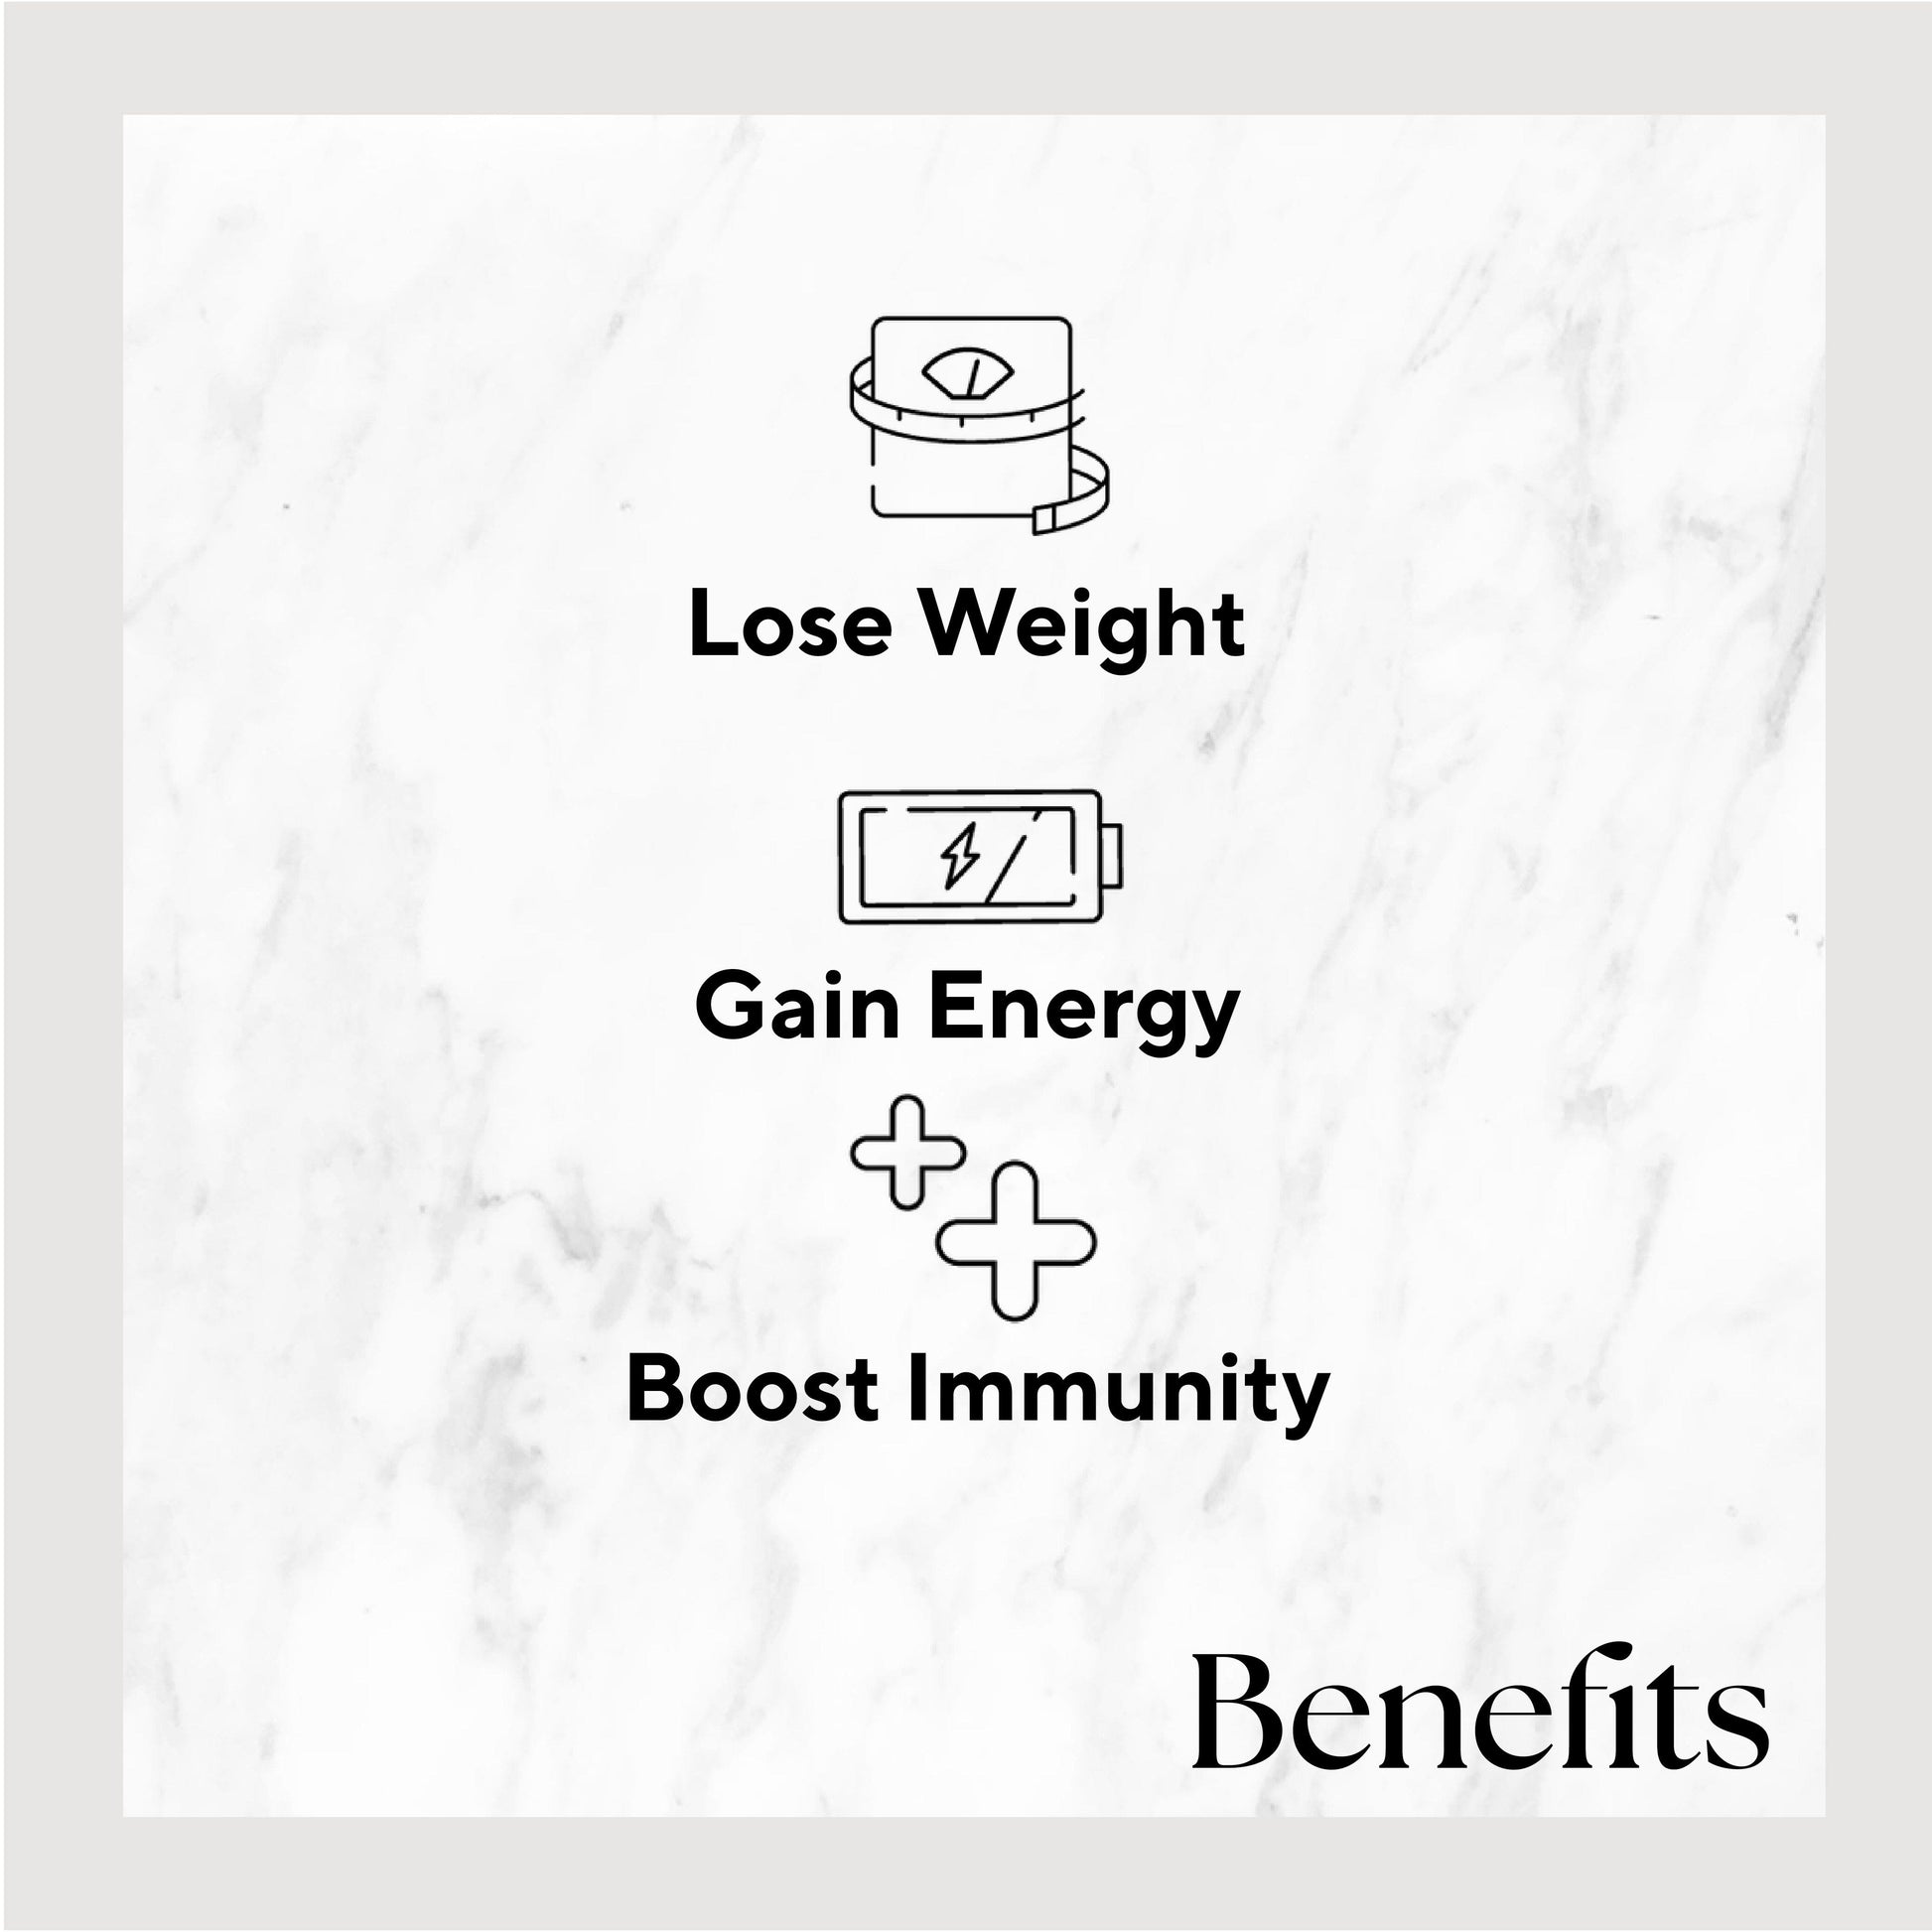 Infographic listing benefits of the product. Benefits include: Lose Weight, Gain Energy, and Boost Immunity.